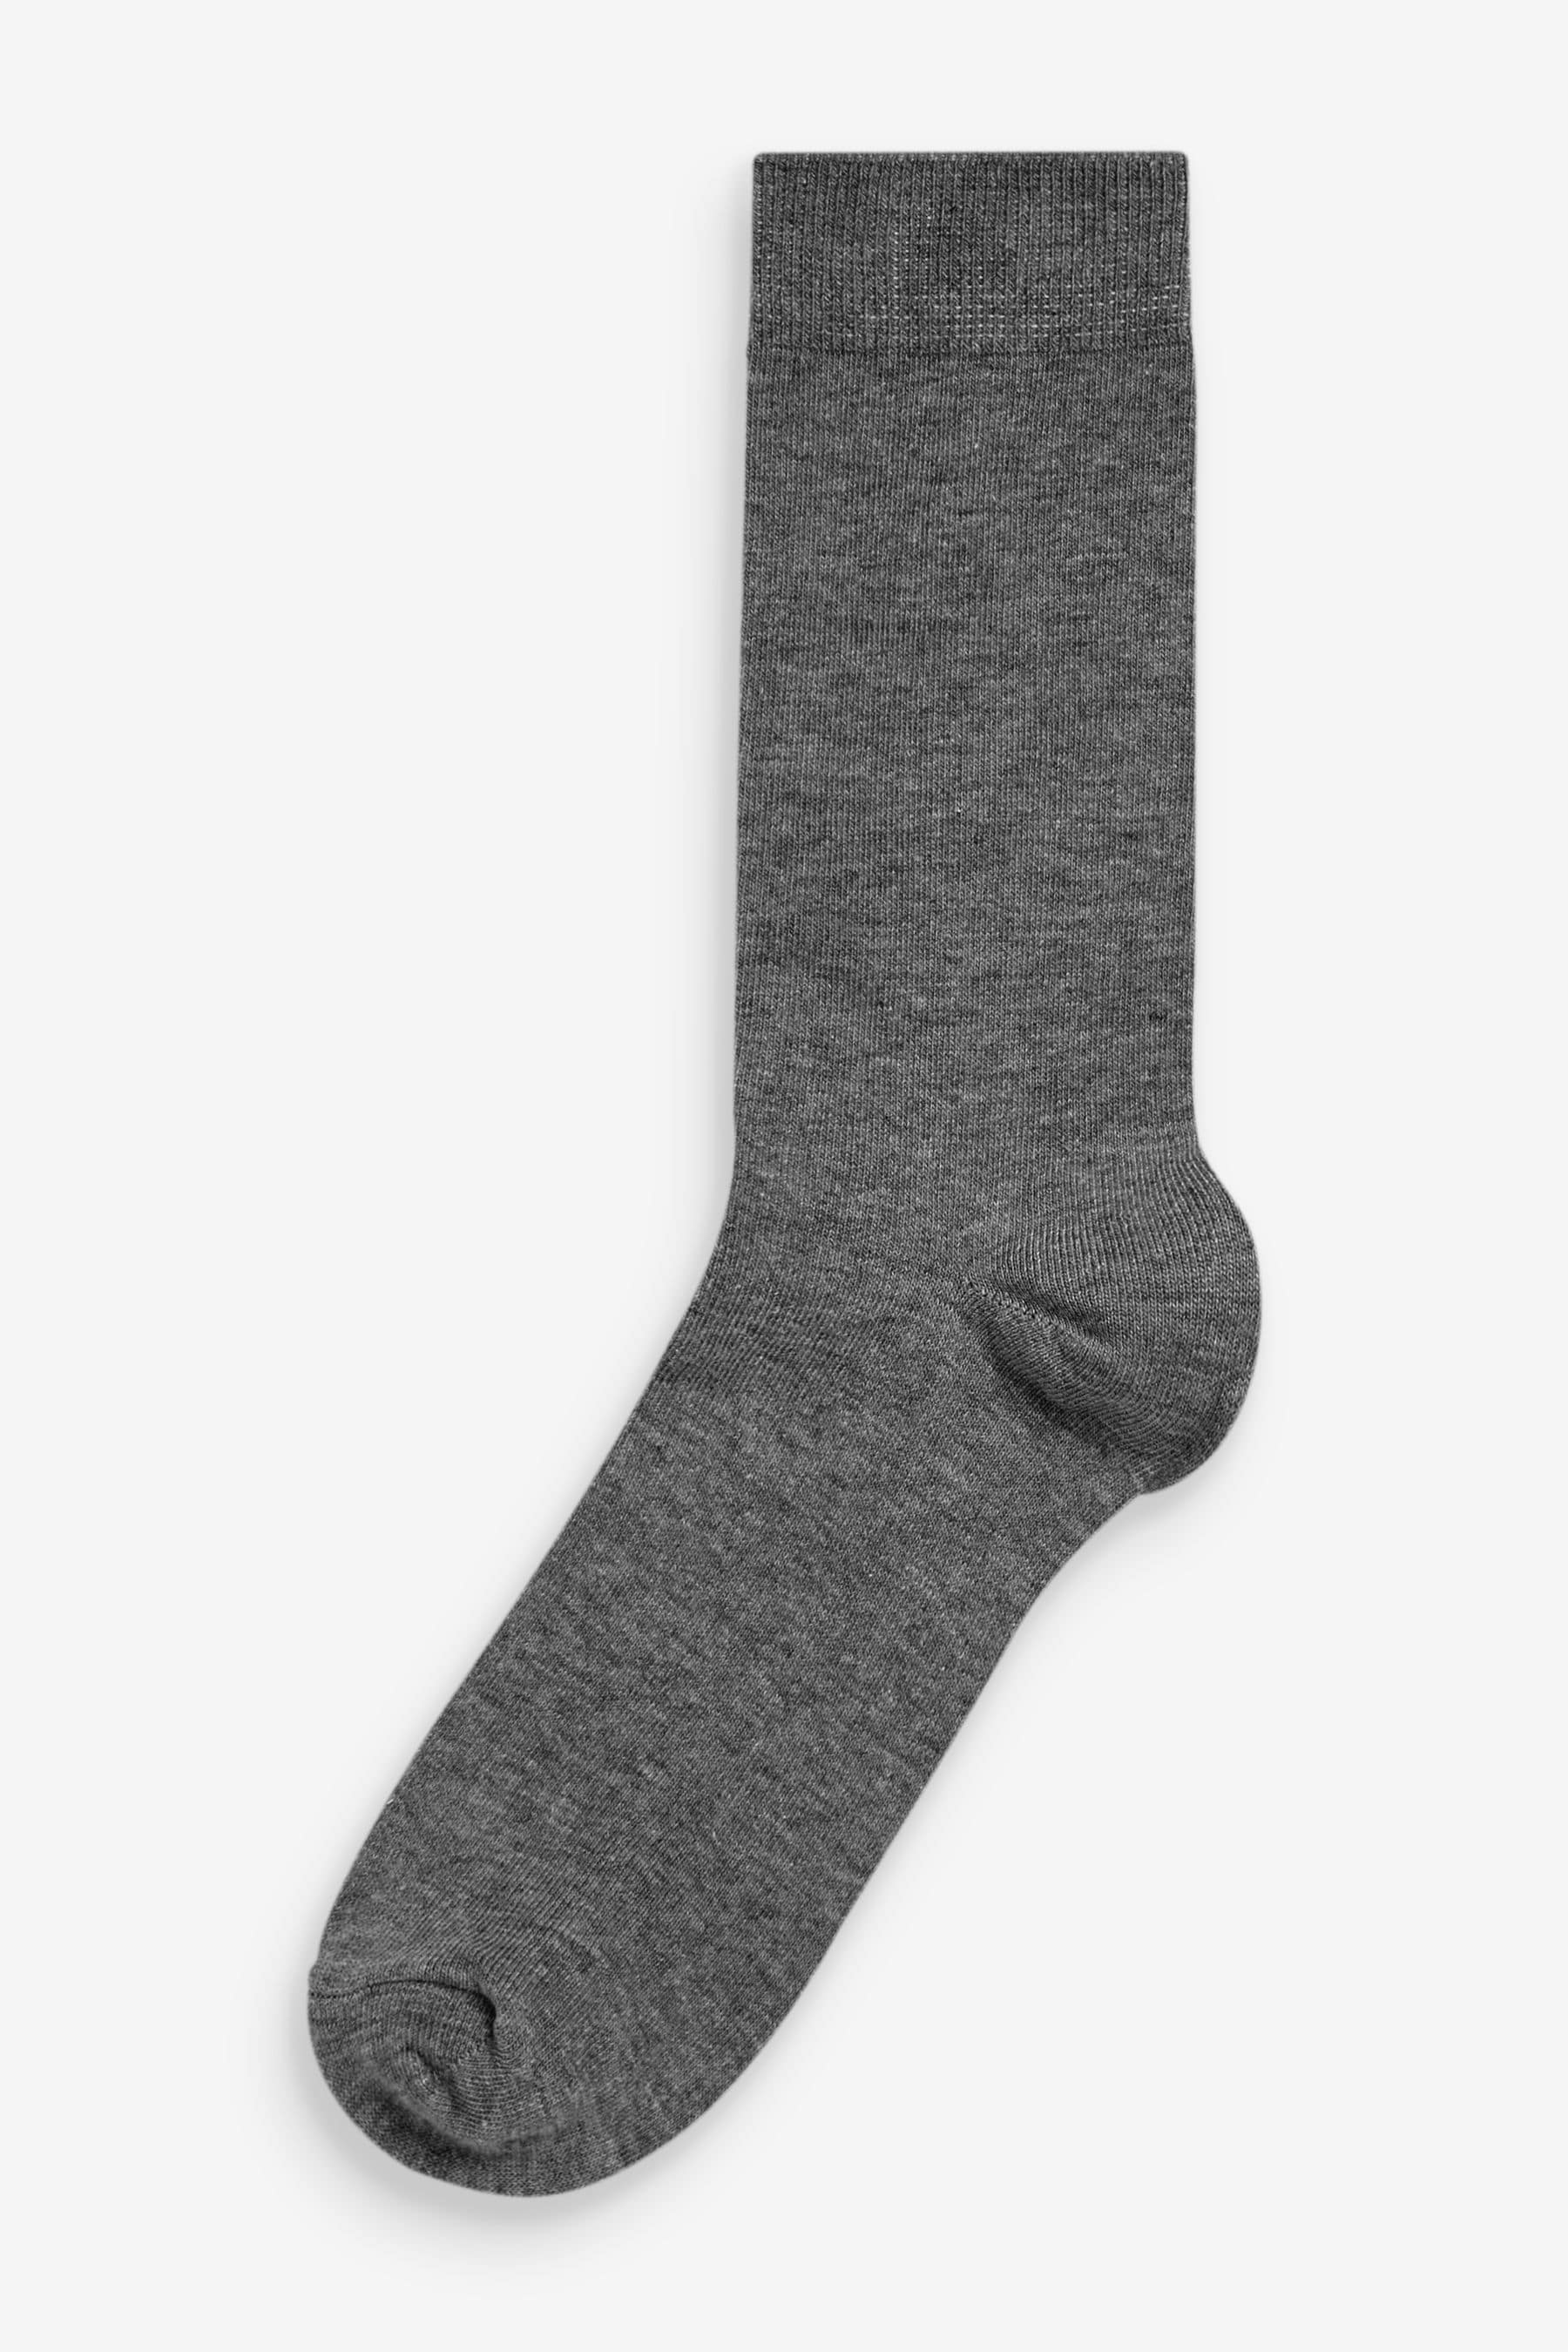 Buy Multi 7 Pack Mens Cotton Rich Socks from the Next UK online shop